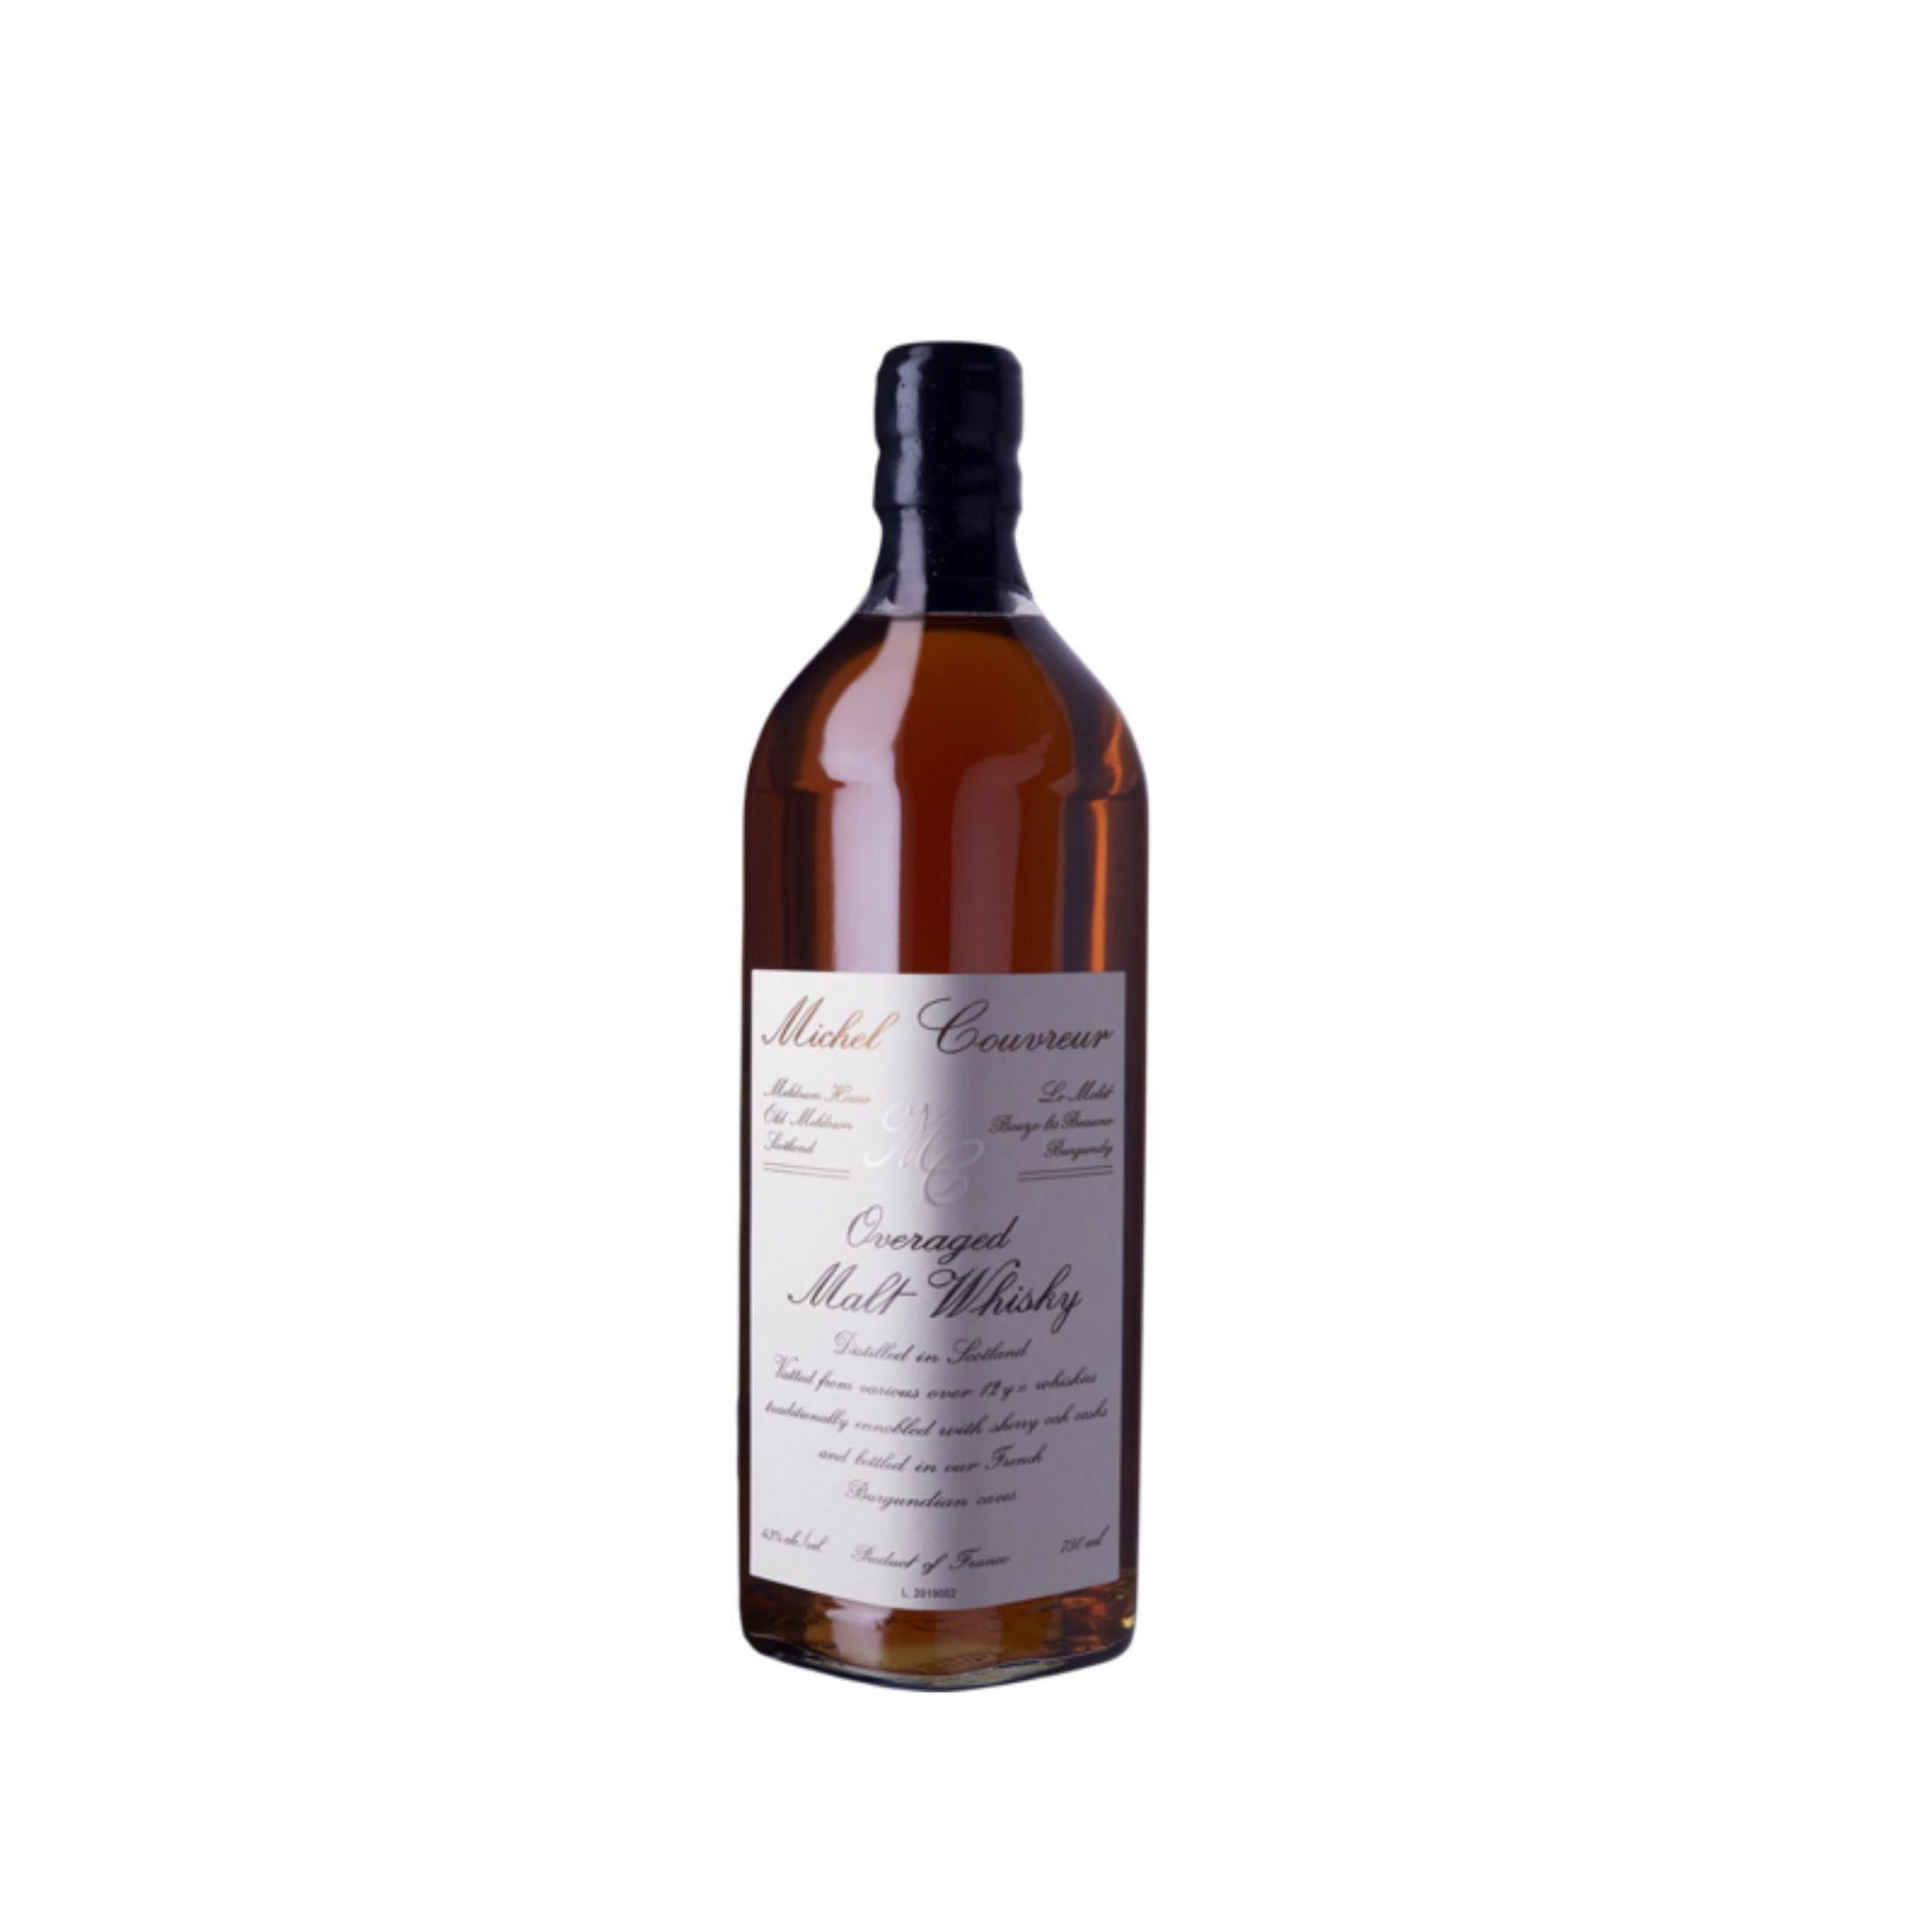 Michel Couvreur Overaged 12 Year Old Malt Whisky (NV) 750ml